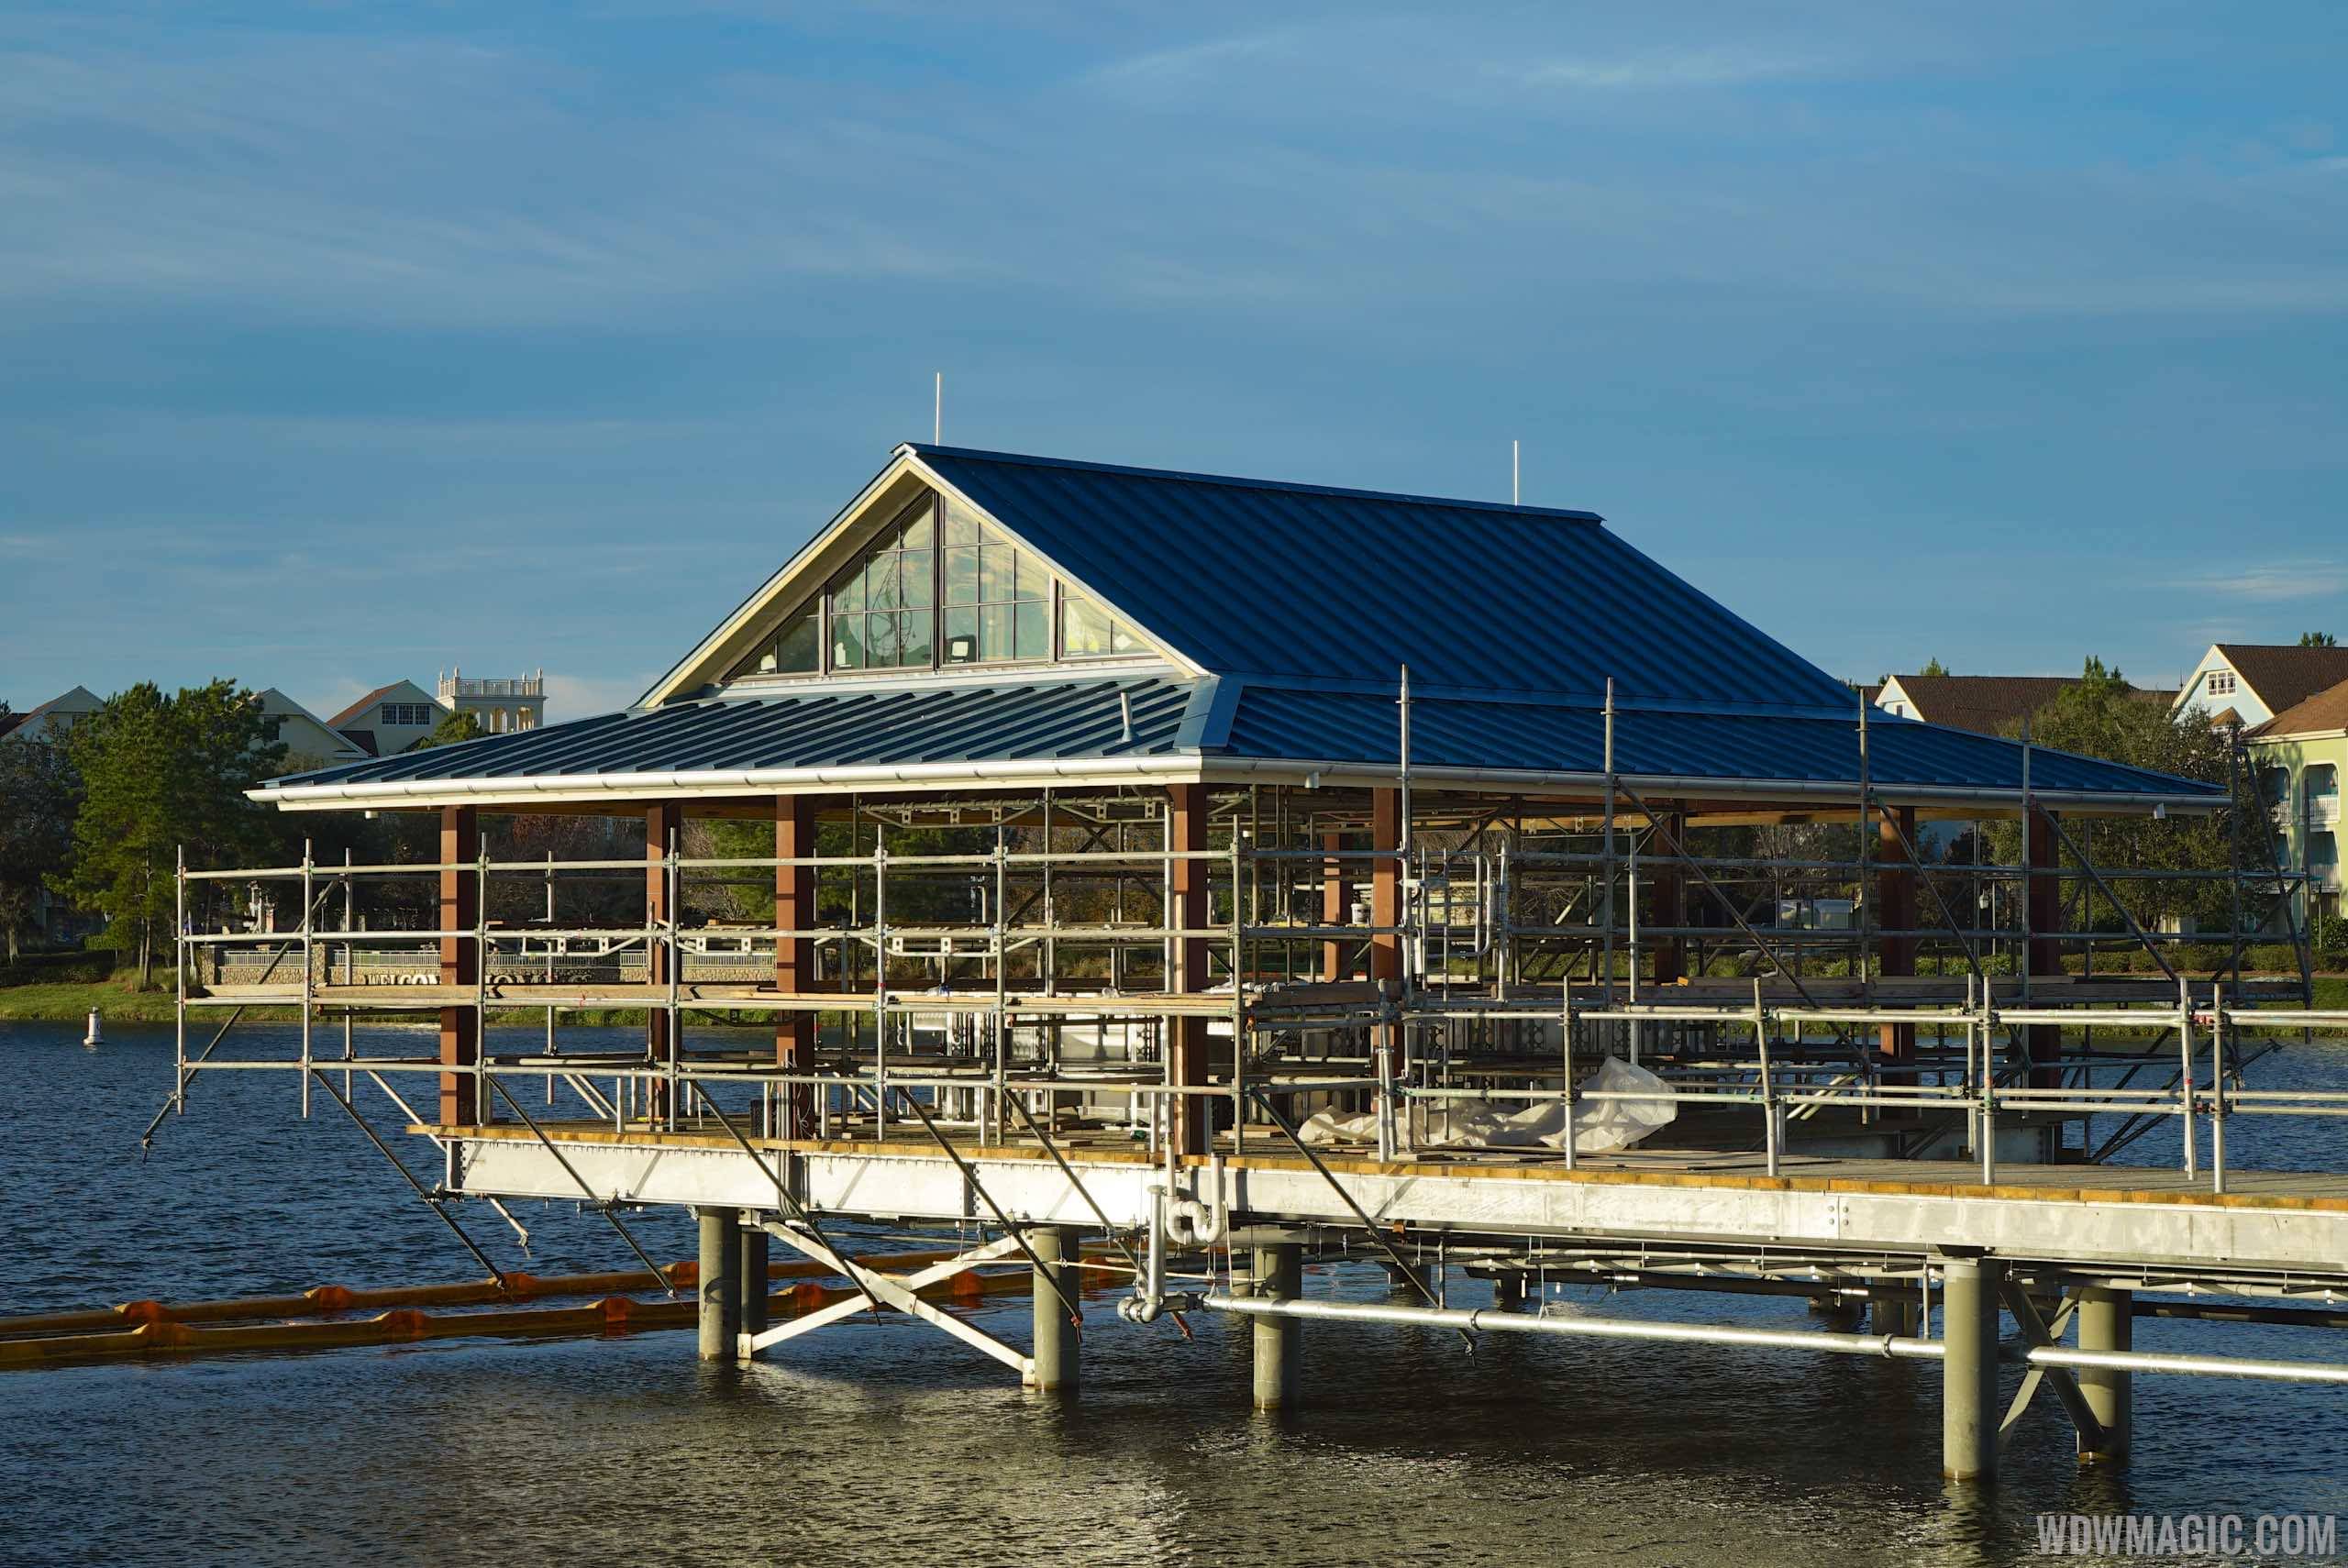 PHOTOS - Scaffolding comes down at Disney Springs The BOATHOUSE